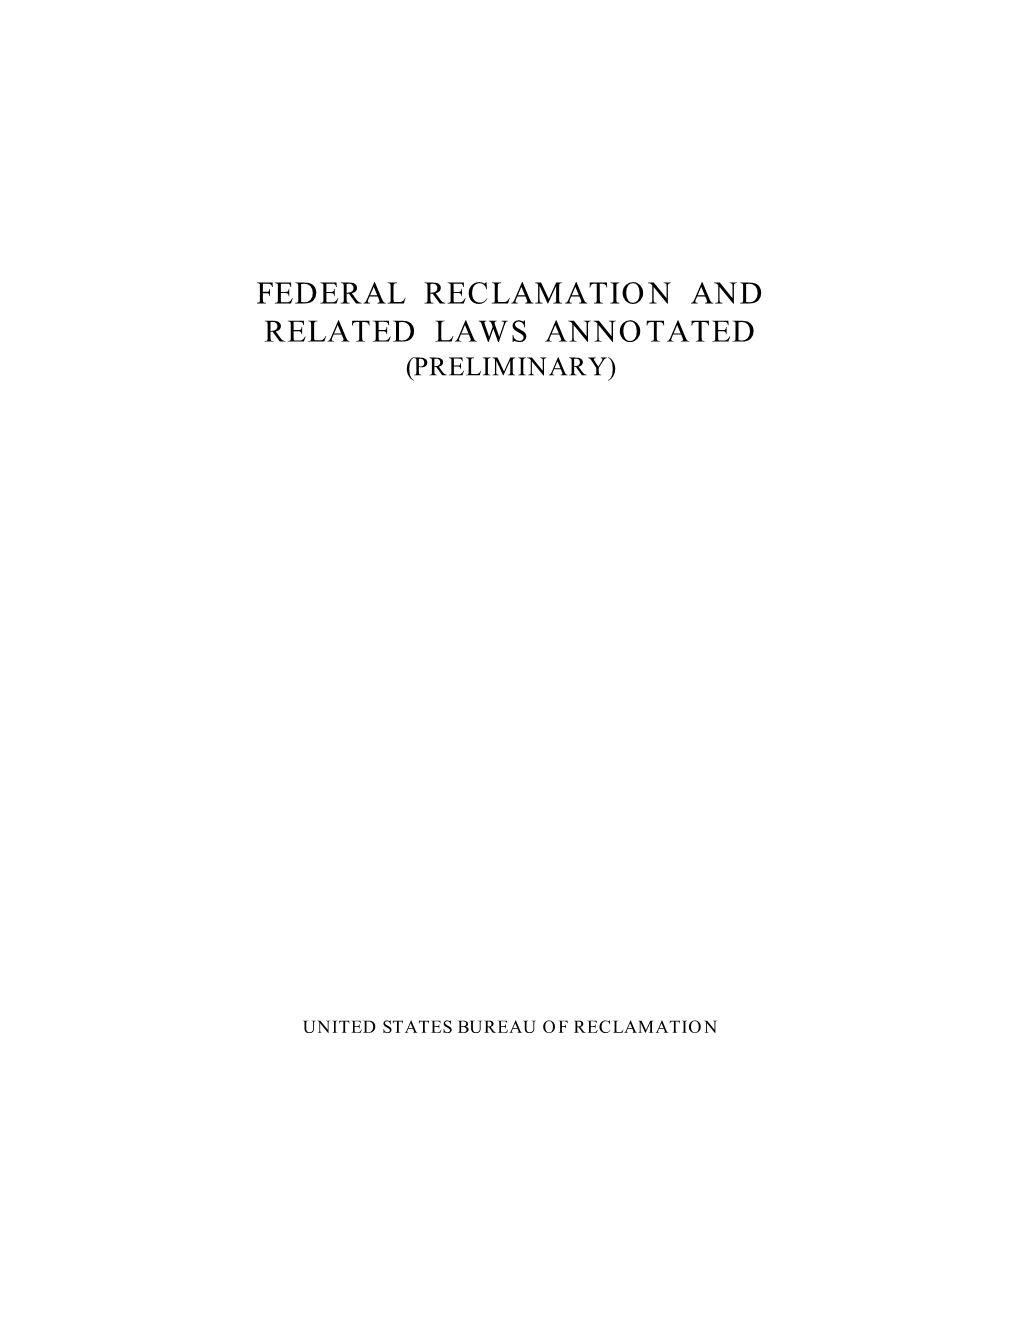 Federal Reclamation and Related Laws Annotated (Preliminary)